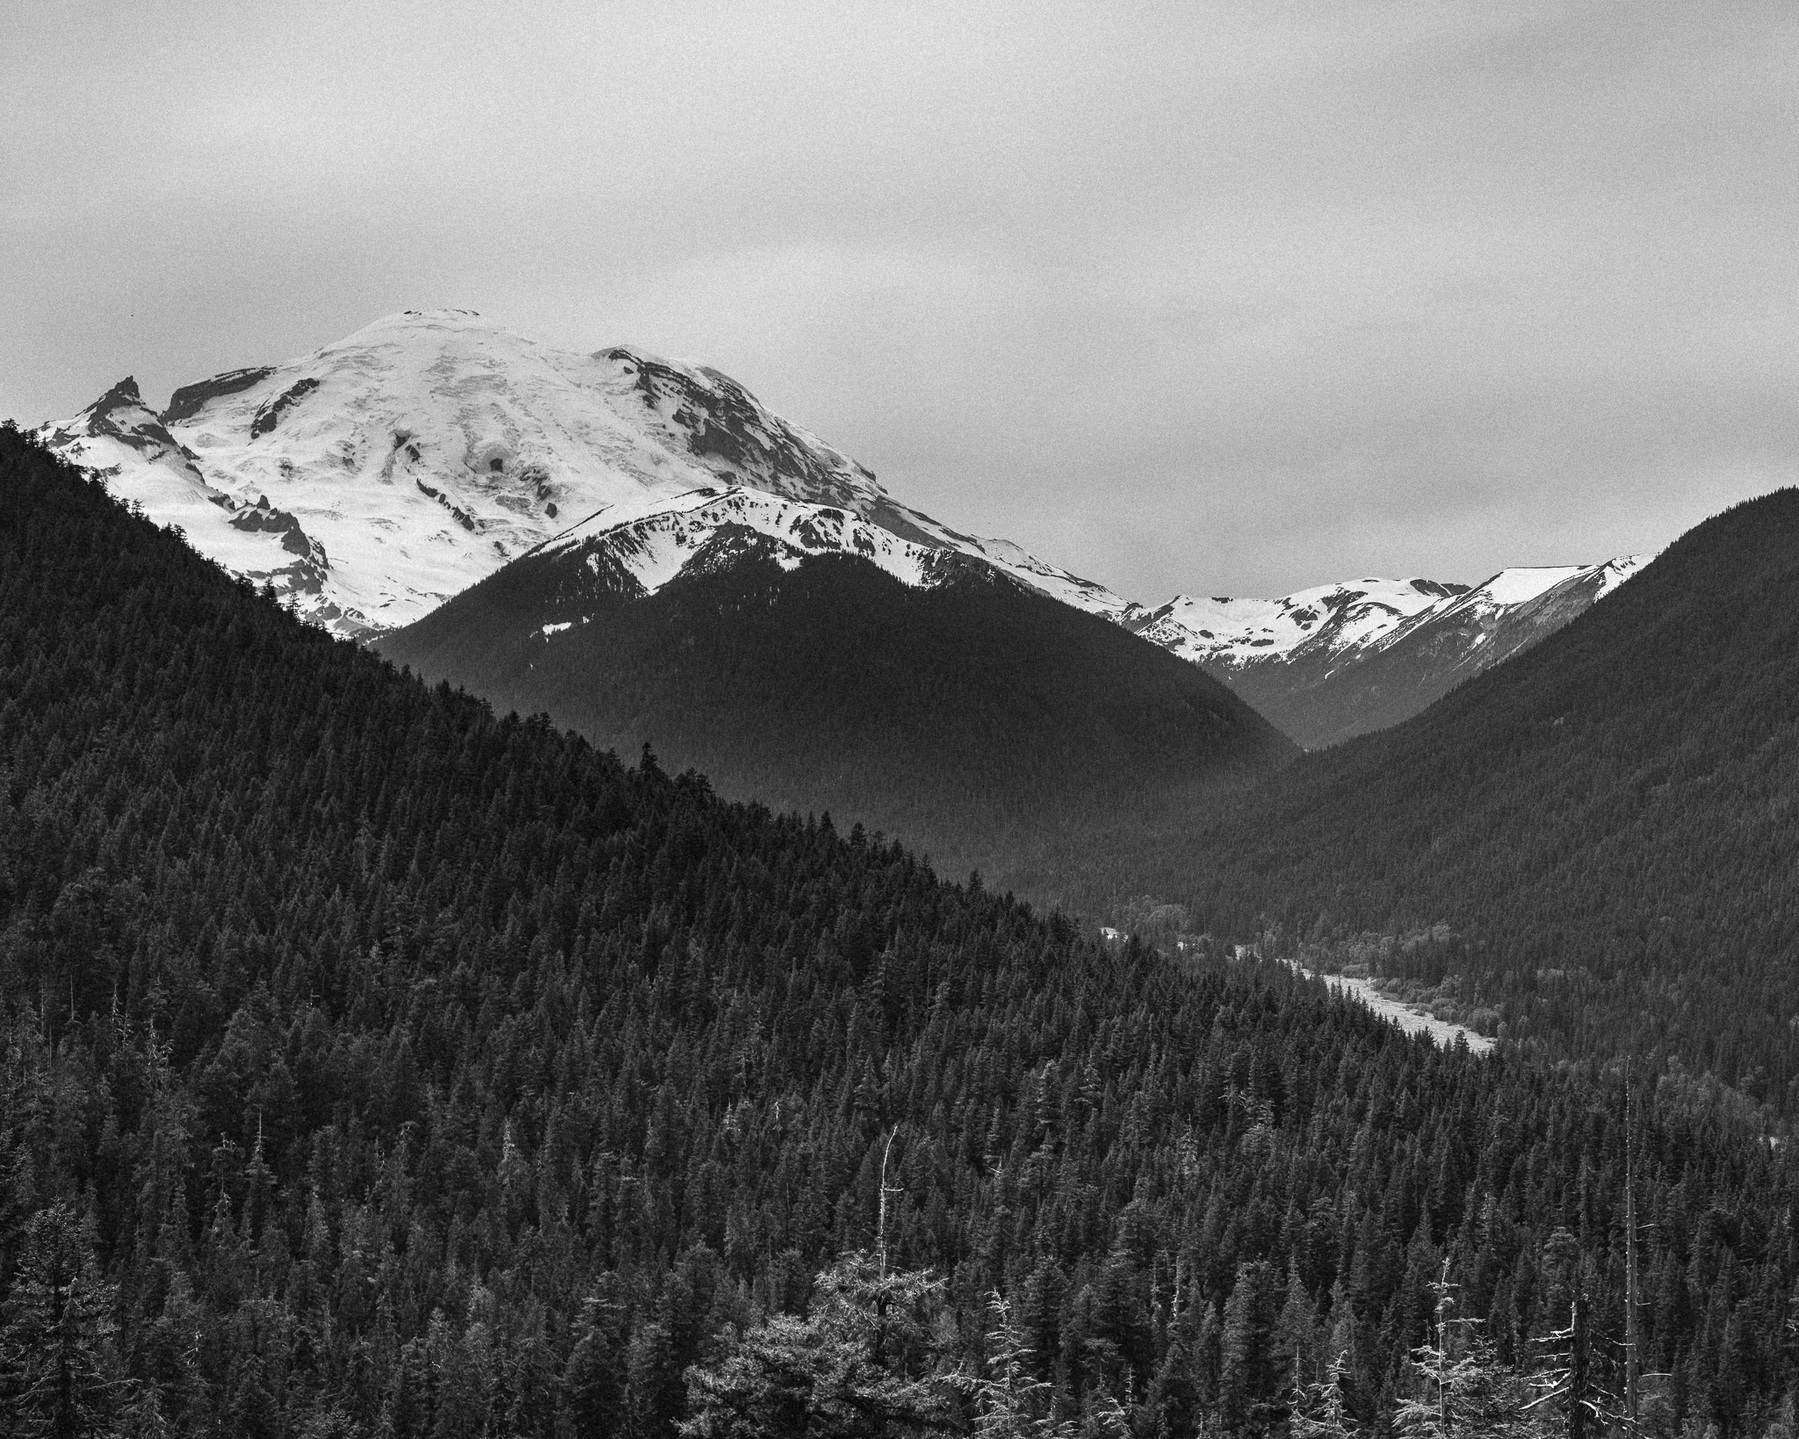 A black and white photo looking over a valley. The bottom of the valley has a small river running through it. The walls of the valley are dense with trees, to the point that it can be difficult to discern them. As you look towards the tops of the valleys, they fade from trees into snow and ice capped peaks filled with texture. The sky is overcast and blotchy.